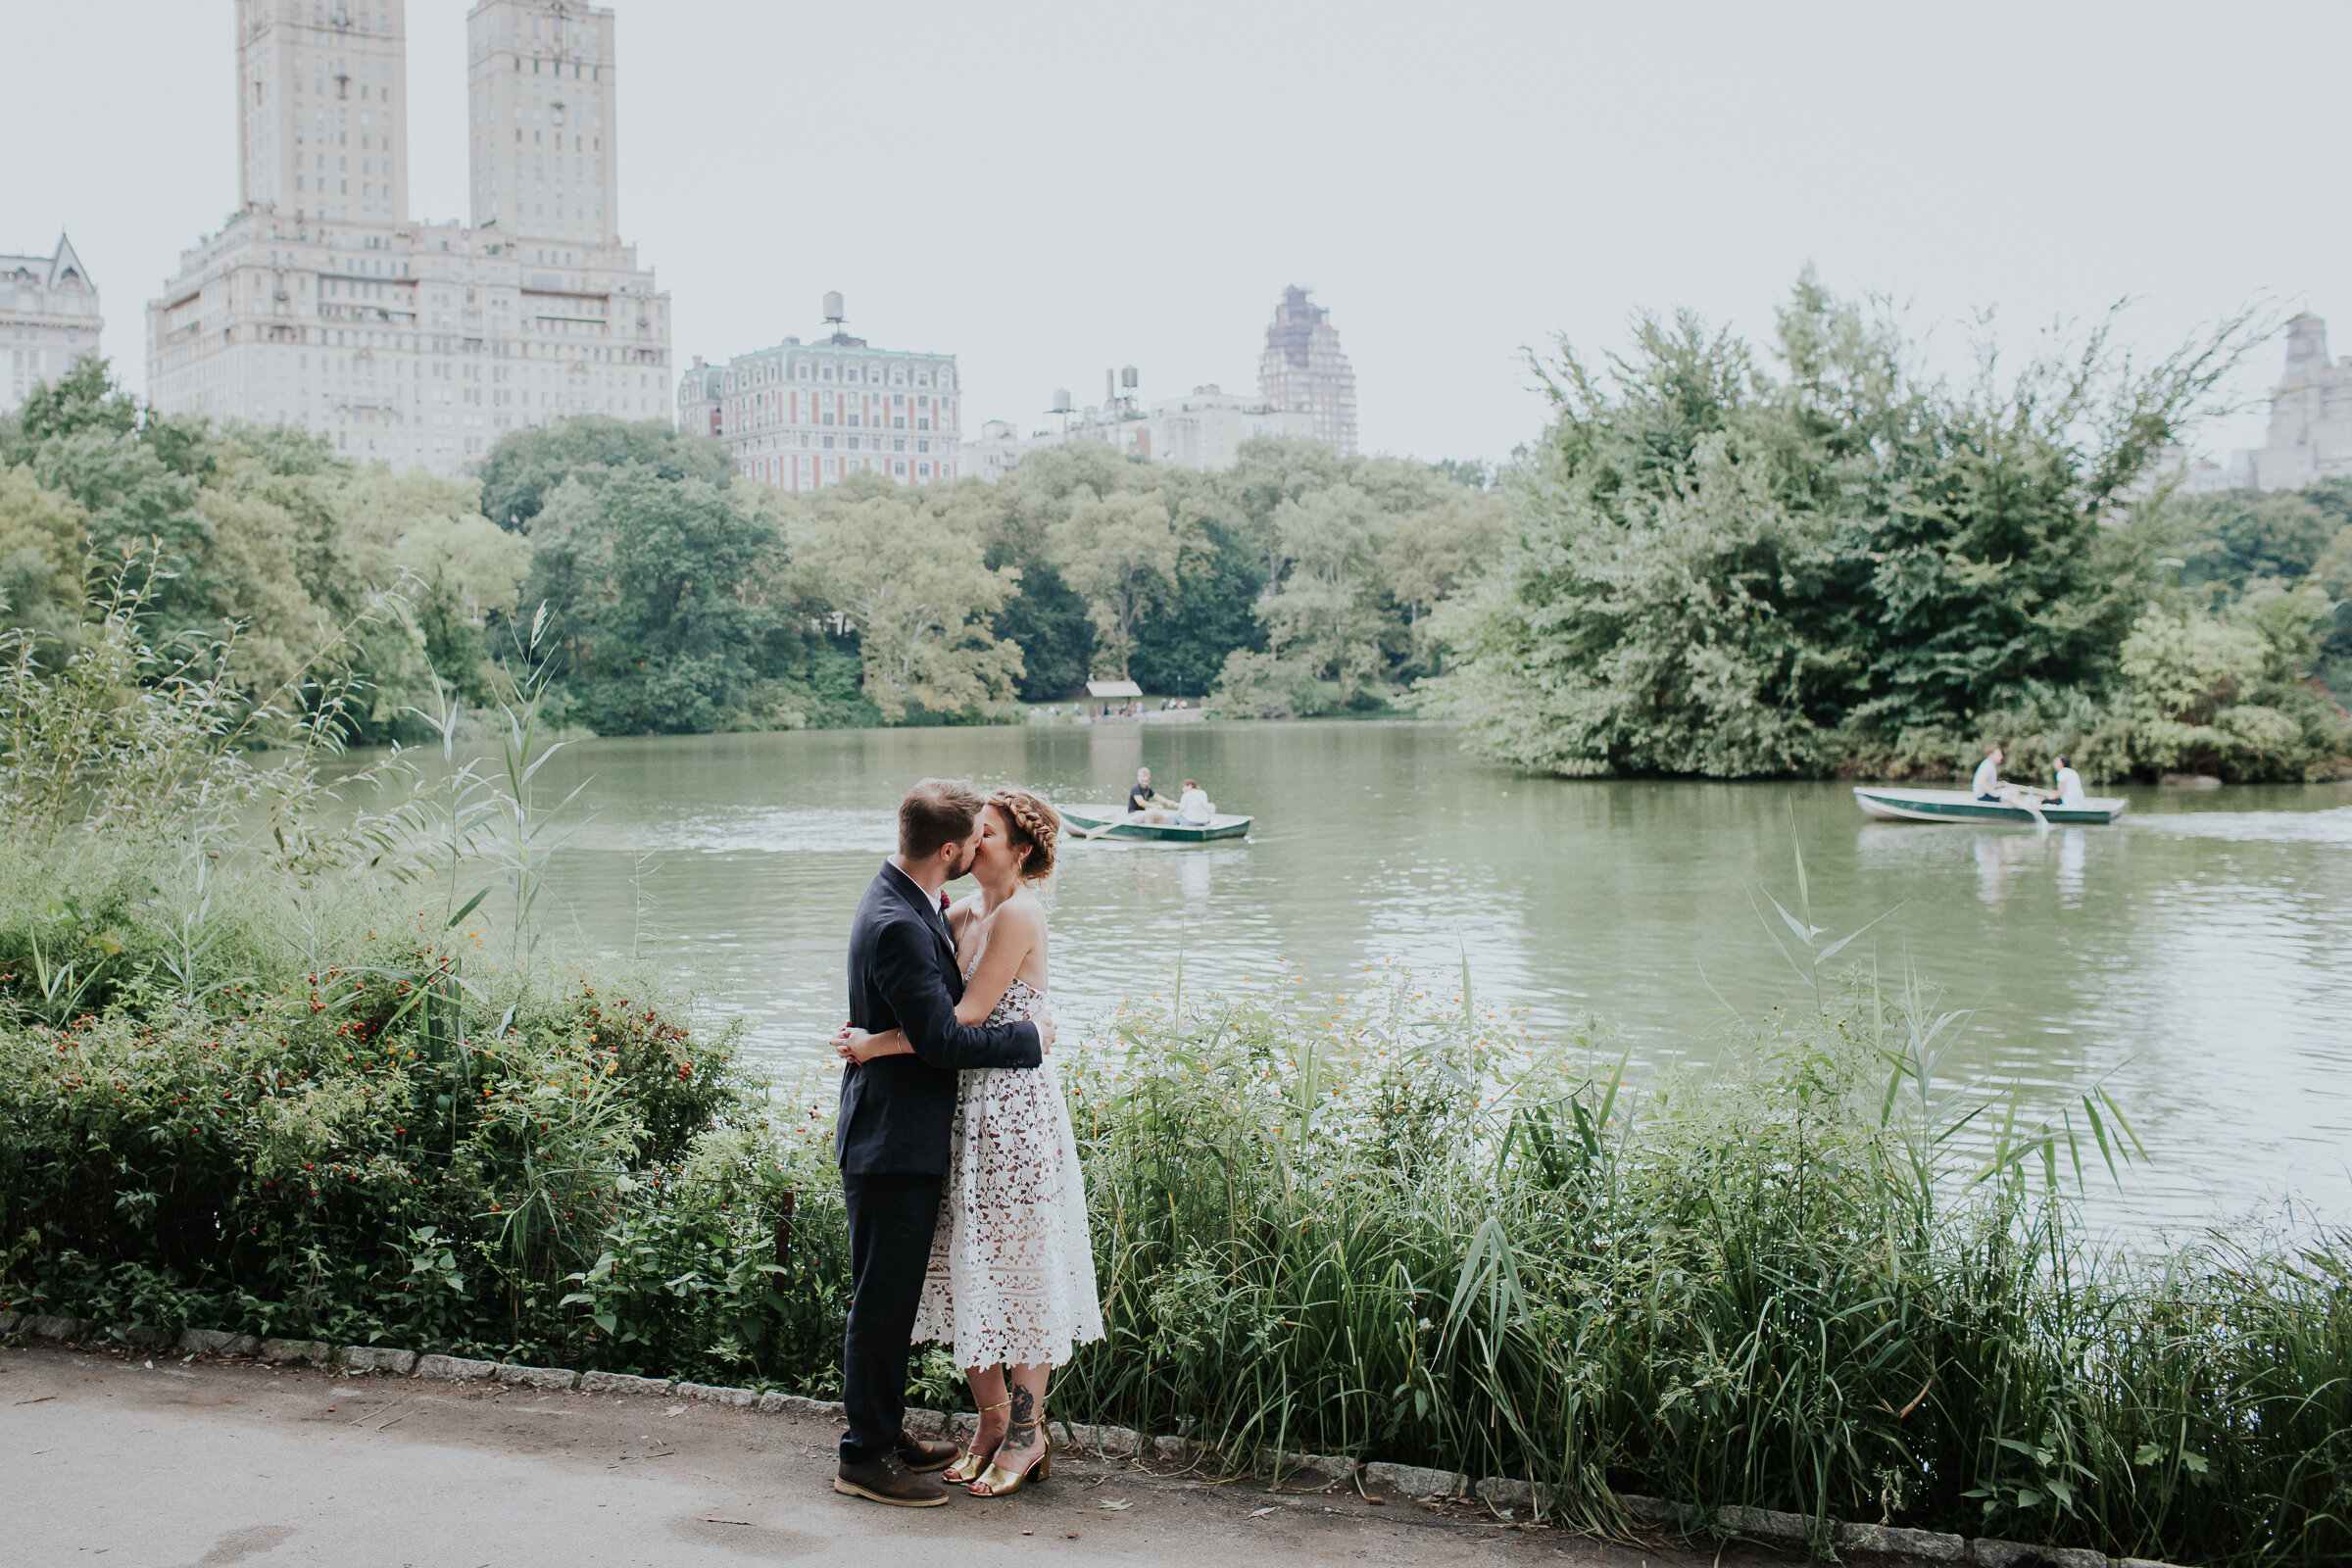 Central-Park-A-Treehouse-For-Dreaming-Elopement-NYC-Documentary-Wedding-Photographer-39.jpg